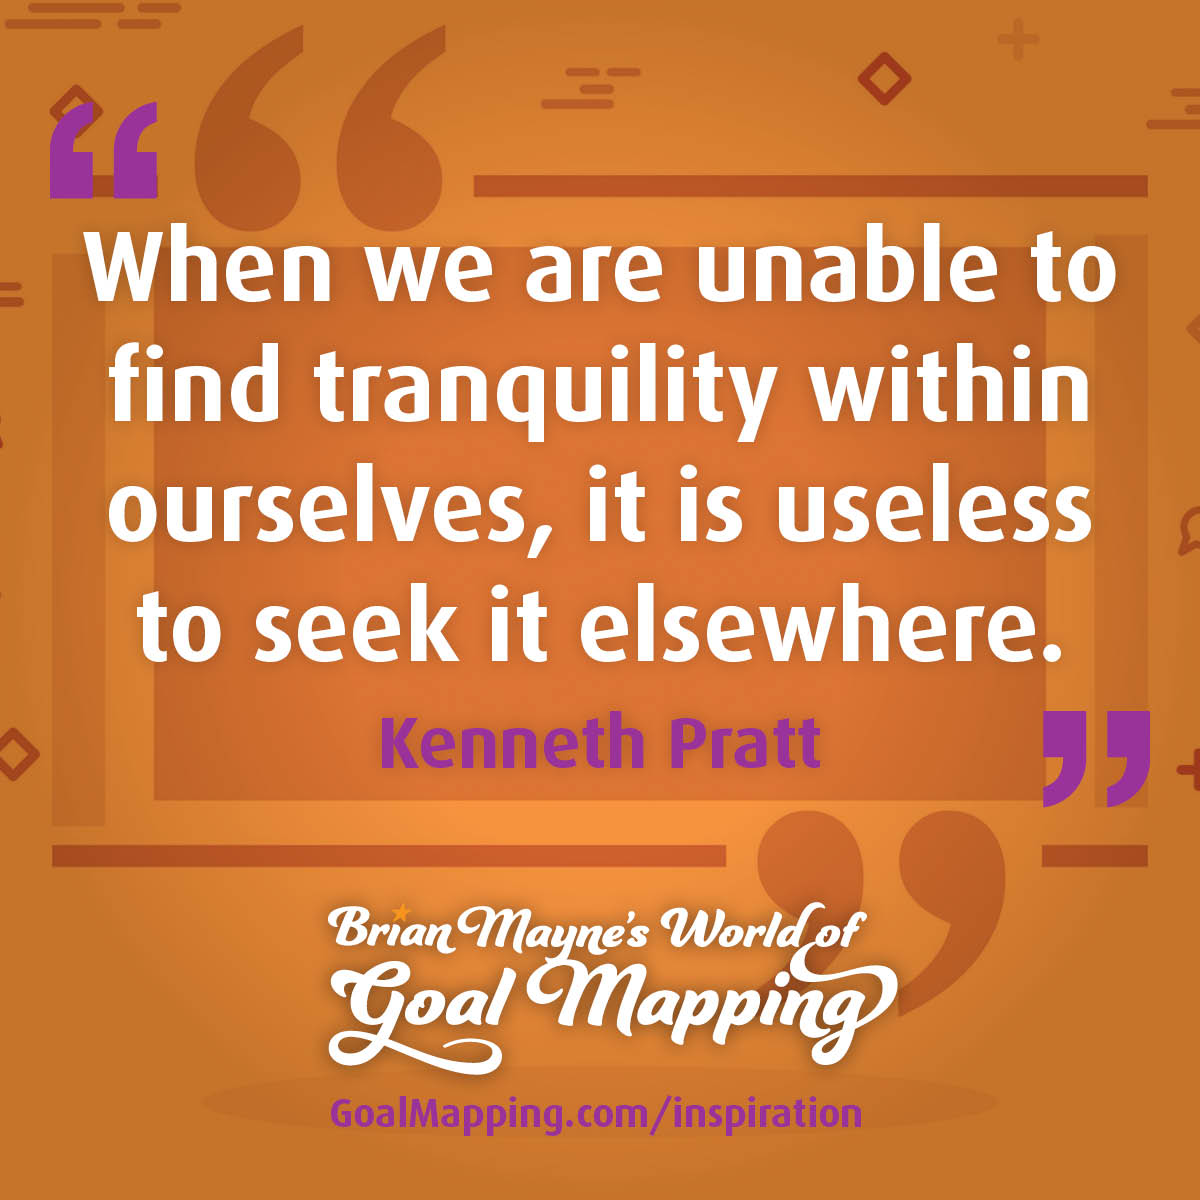 "When we are unable to find tranquility within ourselves, it is useless to seek it elsewhere." Kenneth Pratt